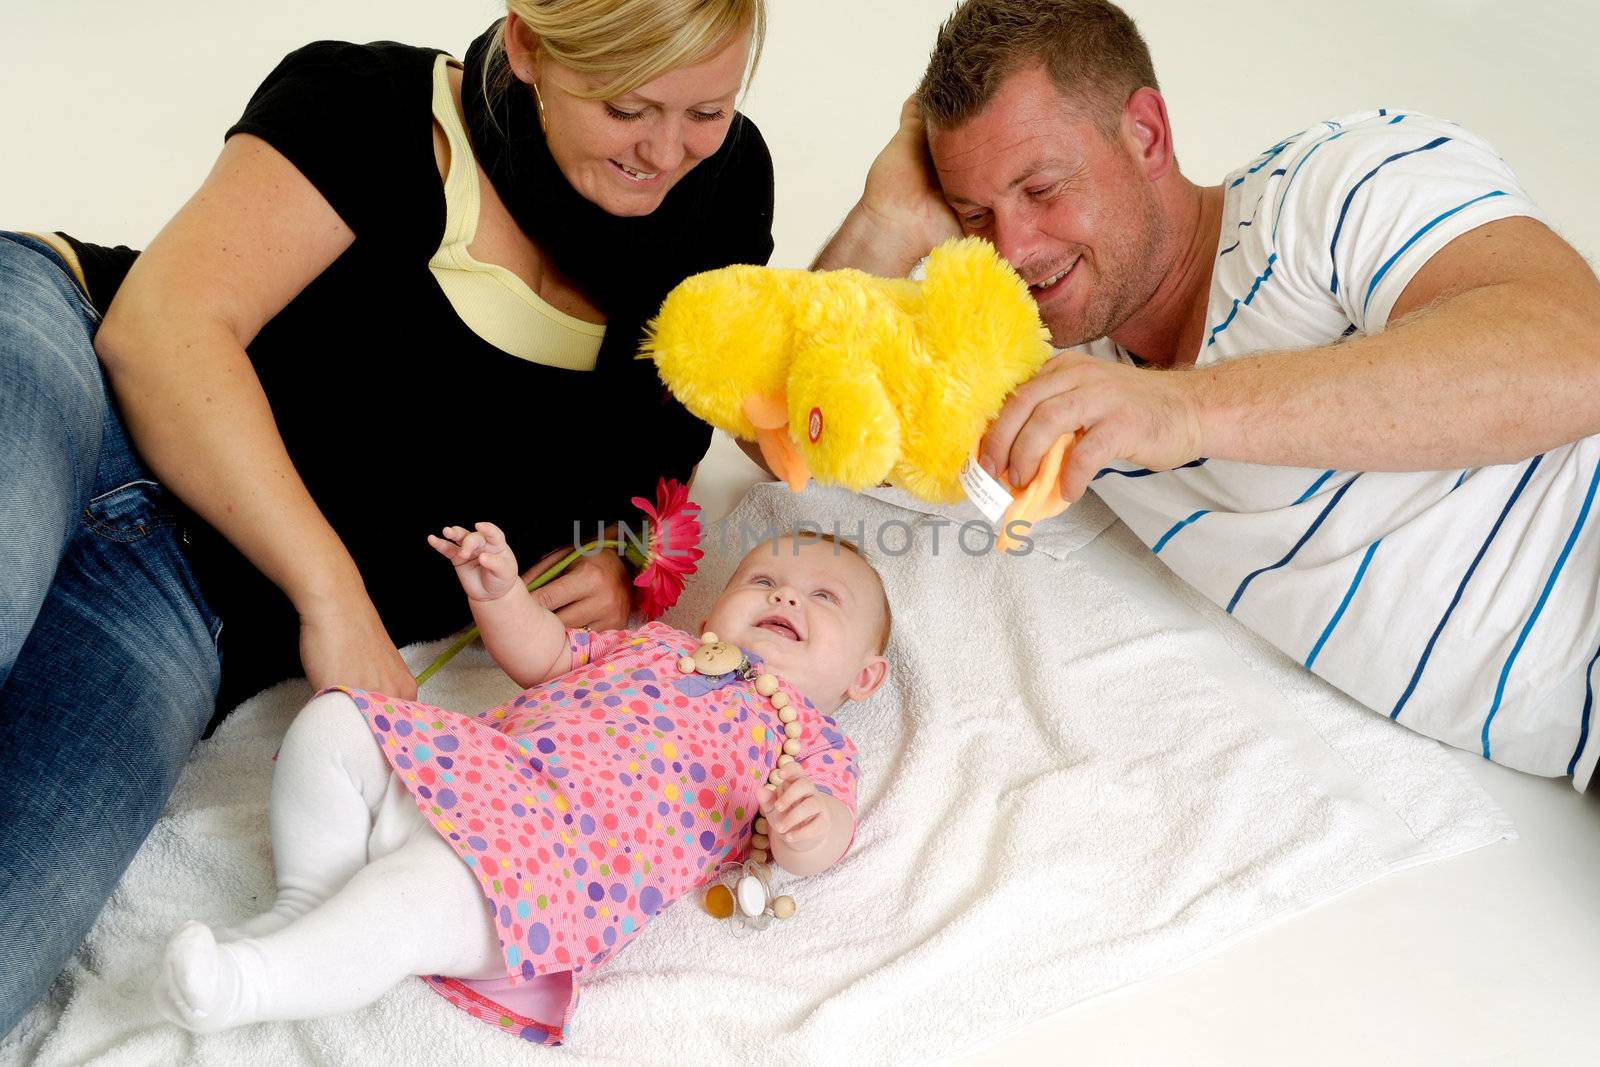 Happy family playing. Mother and father are looking at their sweet smiling 4 month old baby.